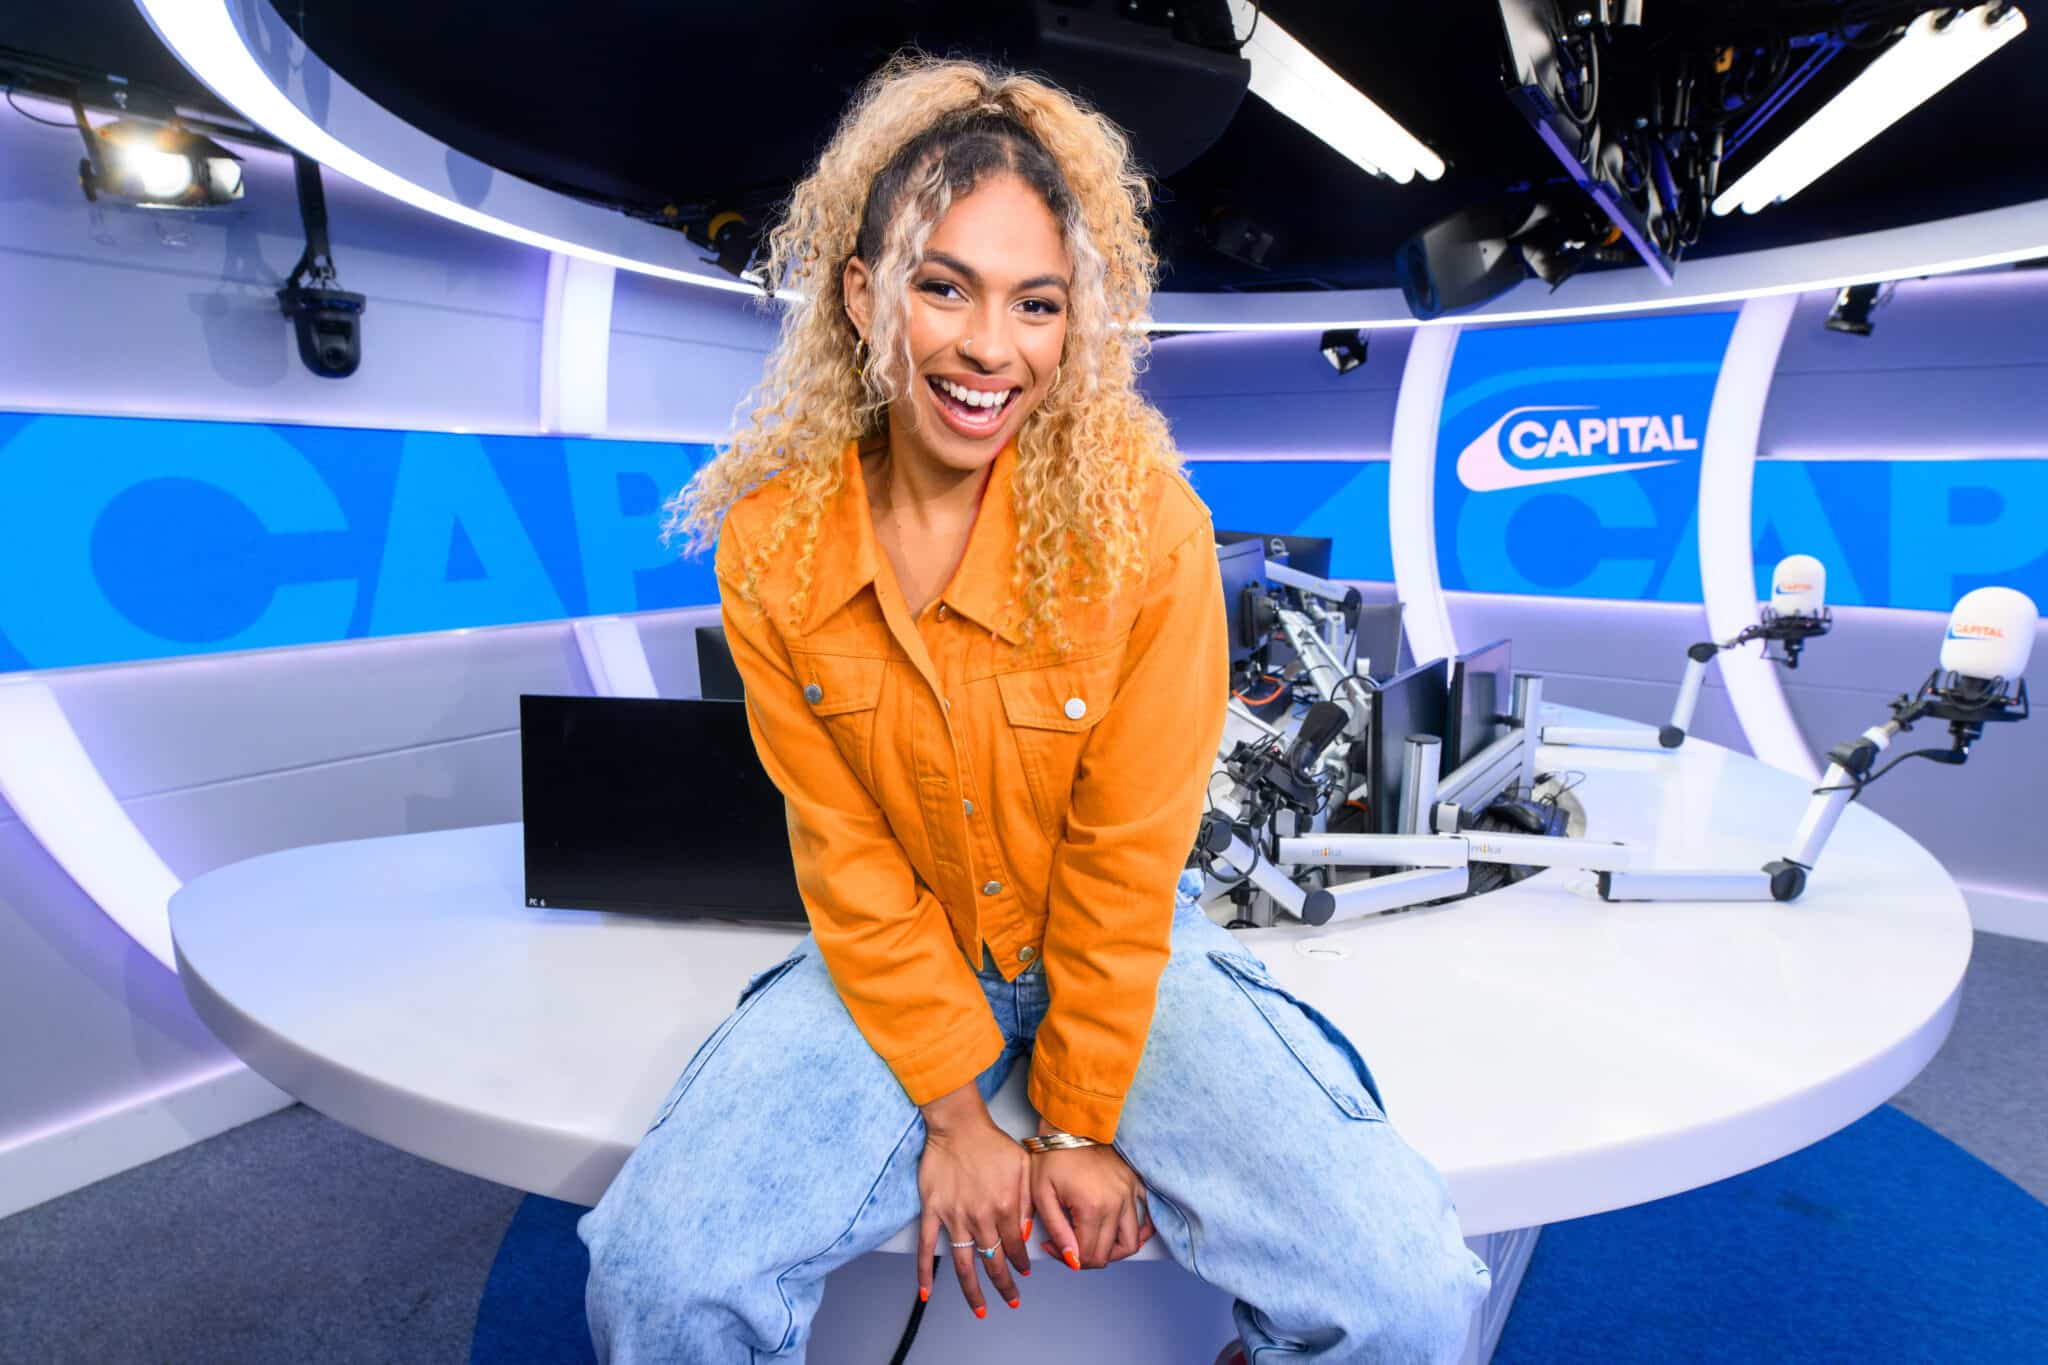 Kemi Rodgers to Cover Sian Welby on Capital Breakfast with Jordan North and Chris Stark